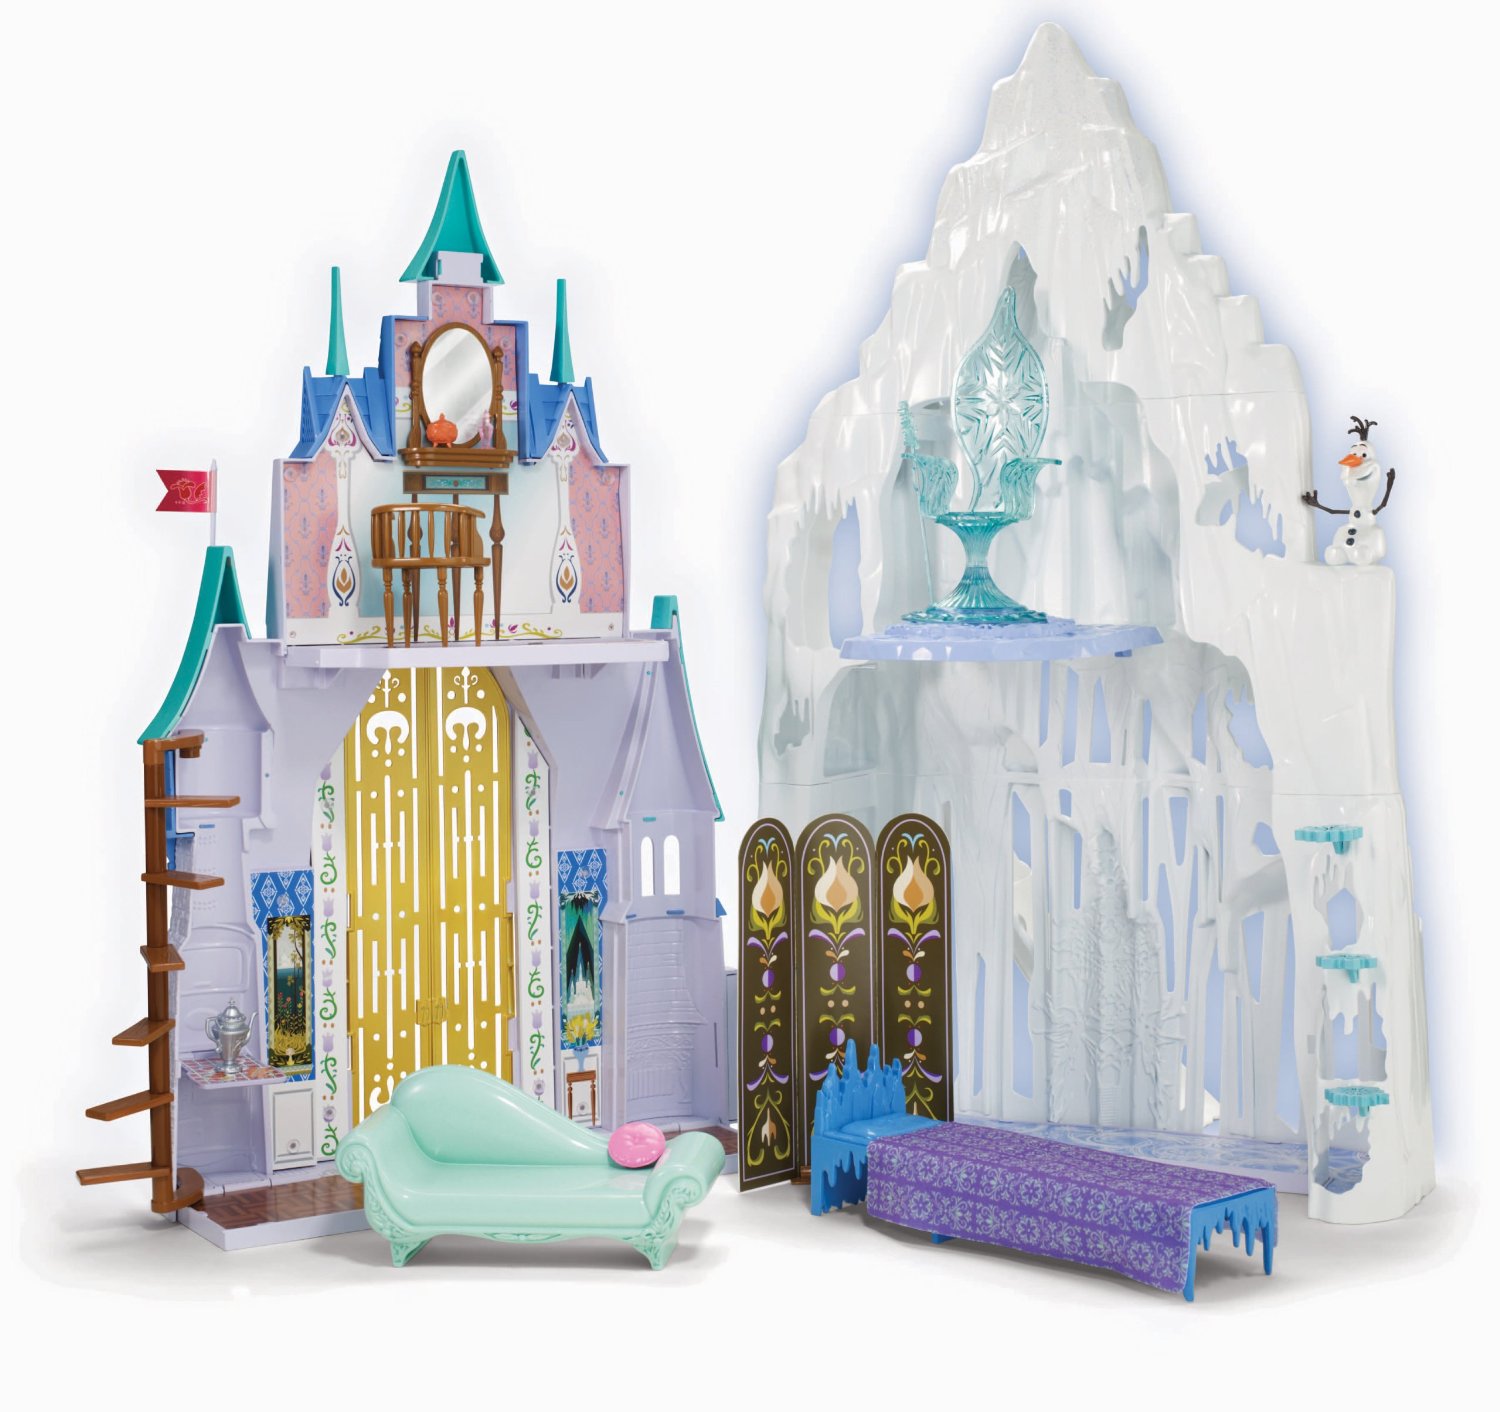 6 Frozen Doll House Reviews - Cute Ice Palace Castles for Every Elsa Fan